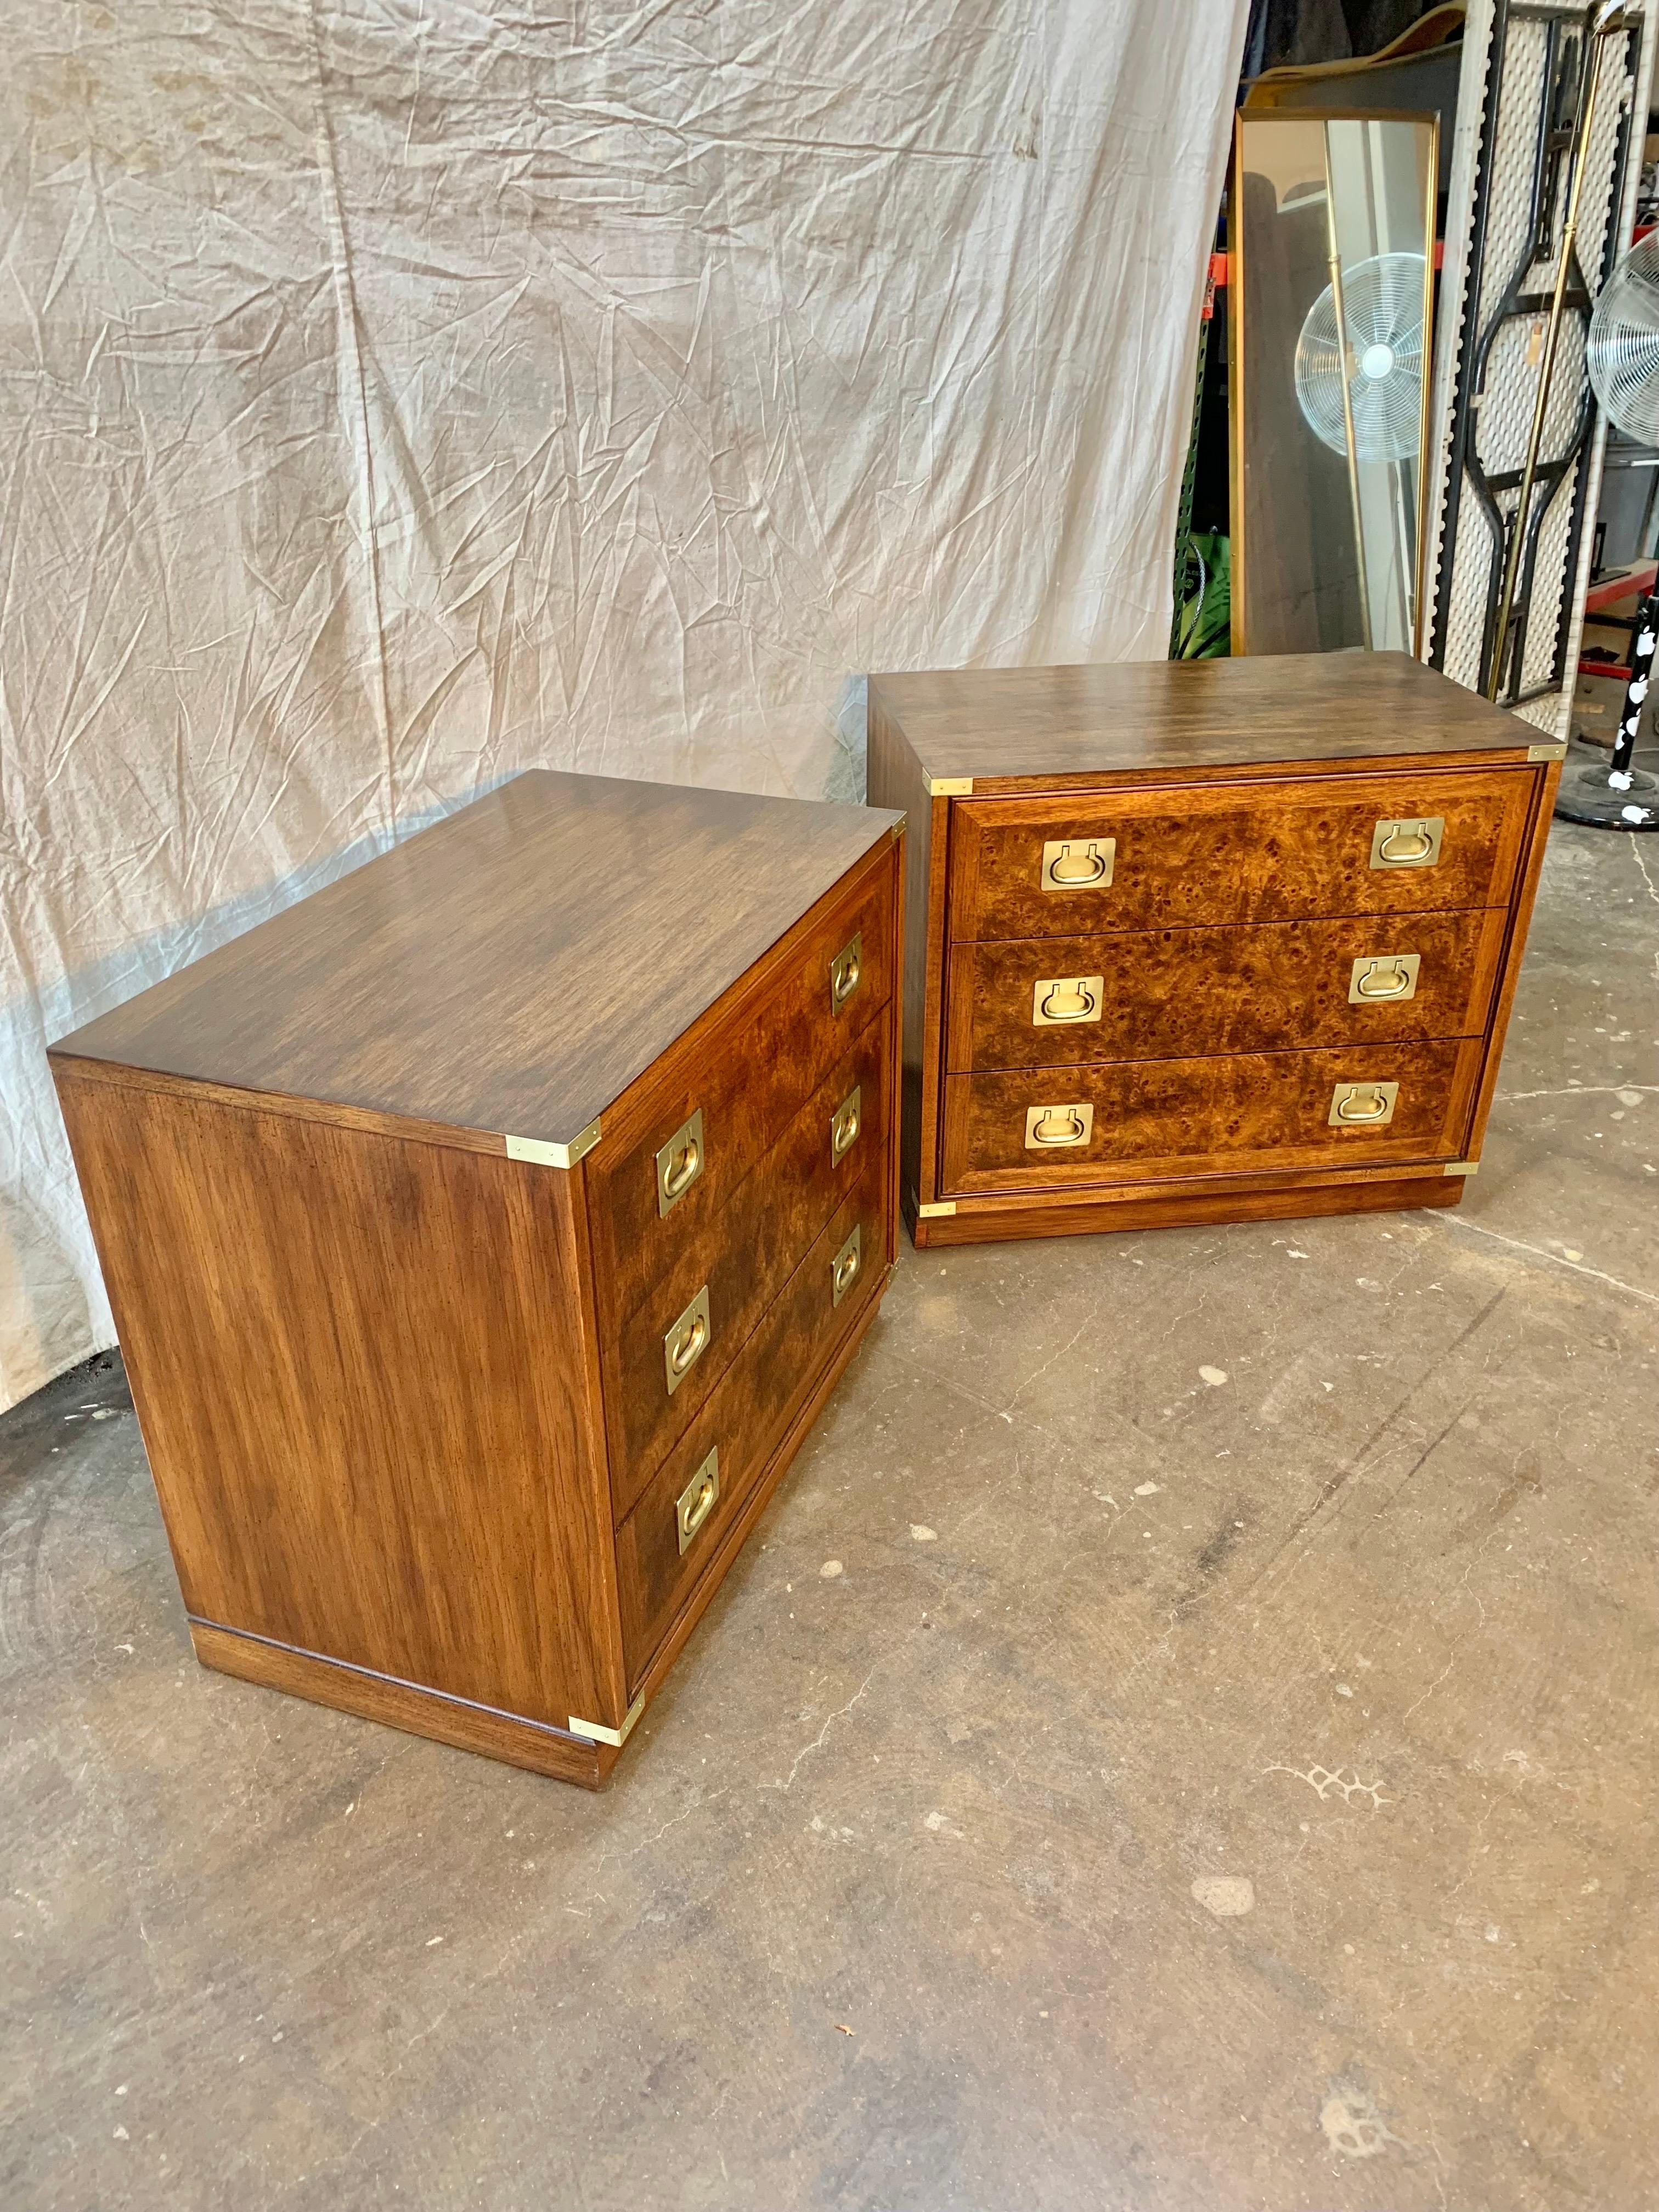 This pair of Campaign Style Bachelor Chest of Drawers were manufactured in the Mid 20th Century by the Hickory Manufacturing Co. Each chest is constructed of solid heavy walnut with Burlwood Venner on the front of each drawer. Both pieces feature